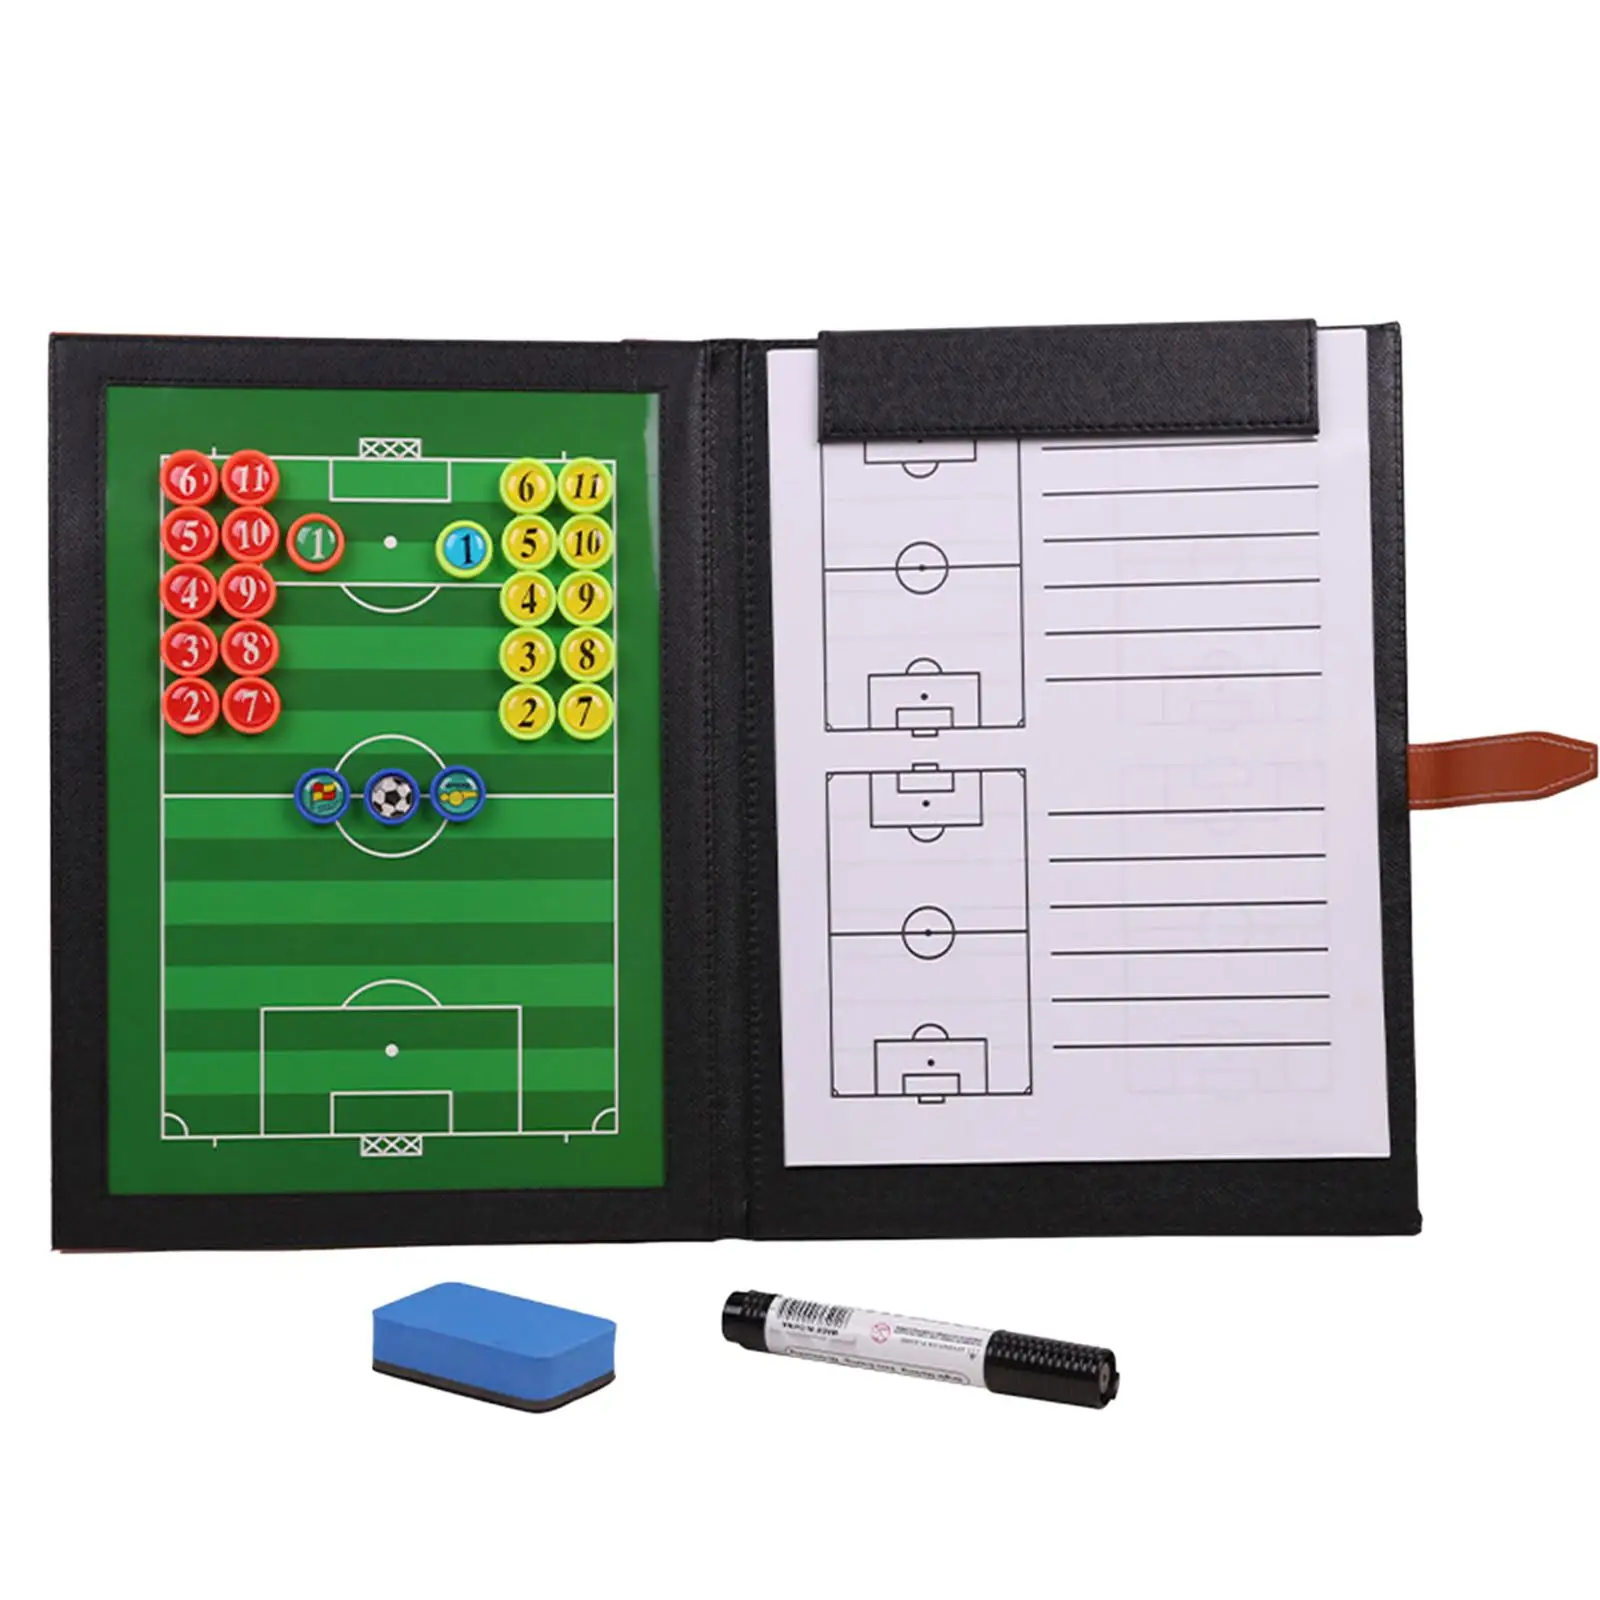 

Professional Football Coaches Board Guidance Training Assistant with Marker Pen Large Soccer Coaching Clipboard for Techniques